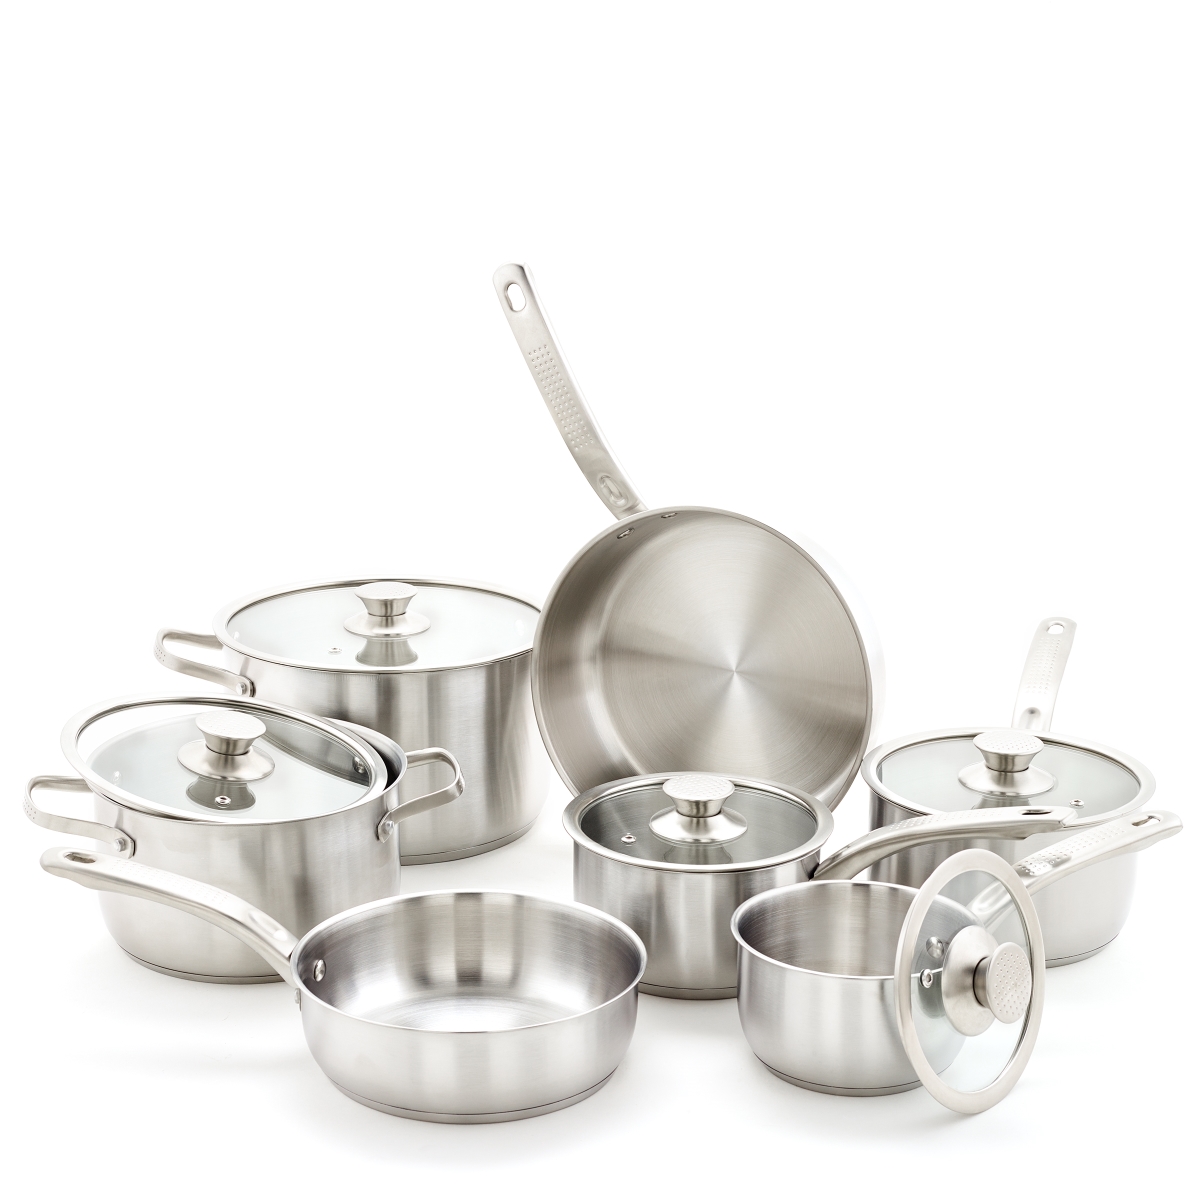 1519 Stainless Steel Cookware Set - 12 Piece